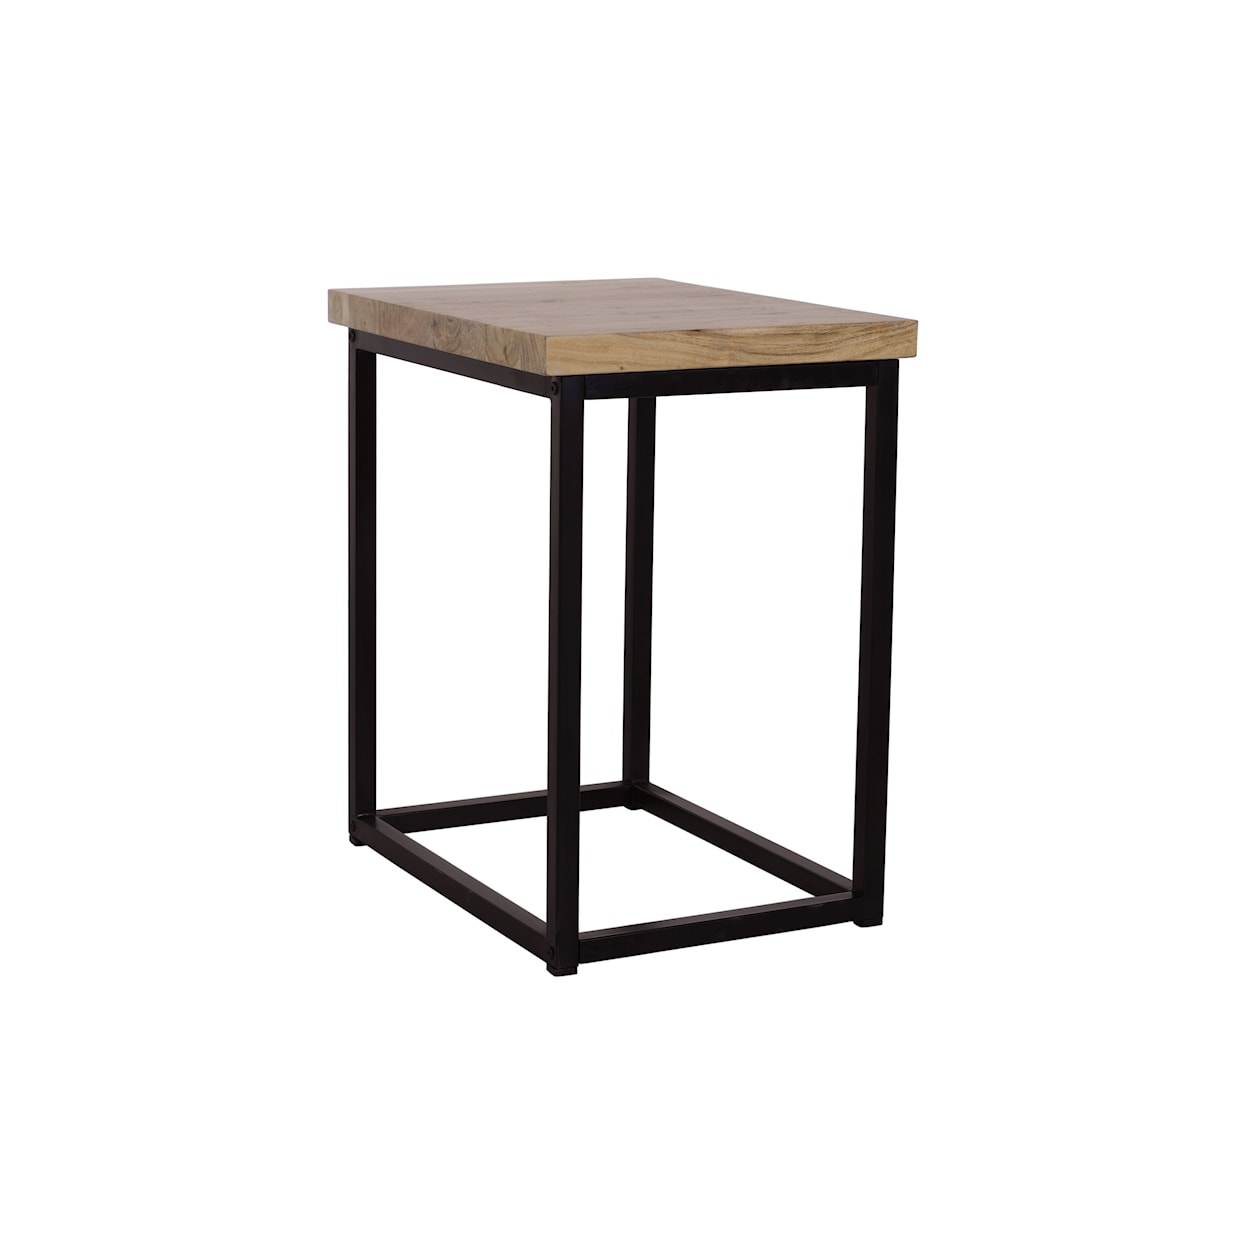 VFM Signature Ames Chair Side Table